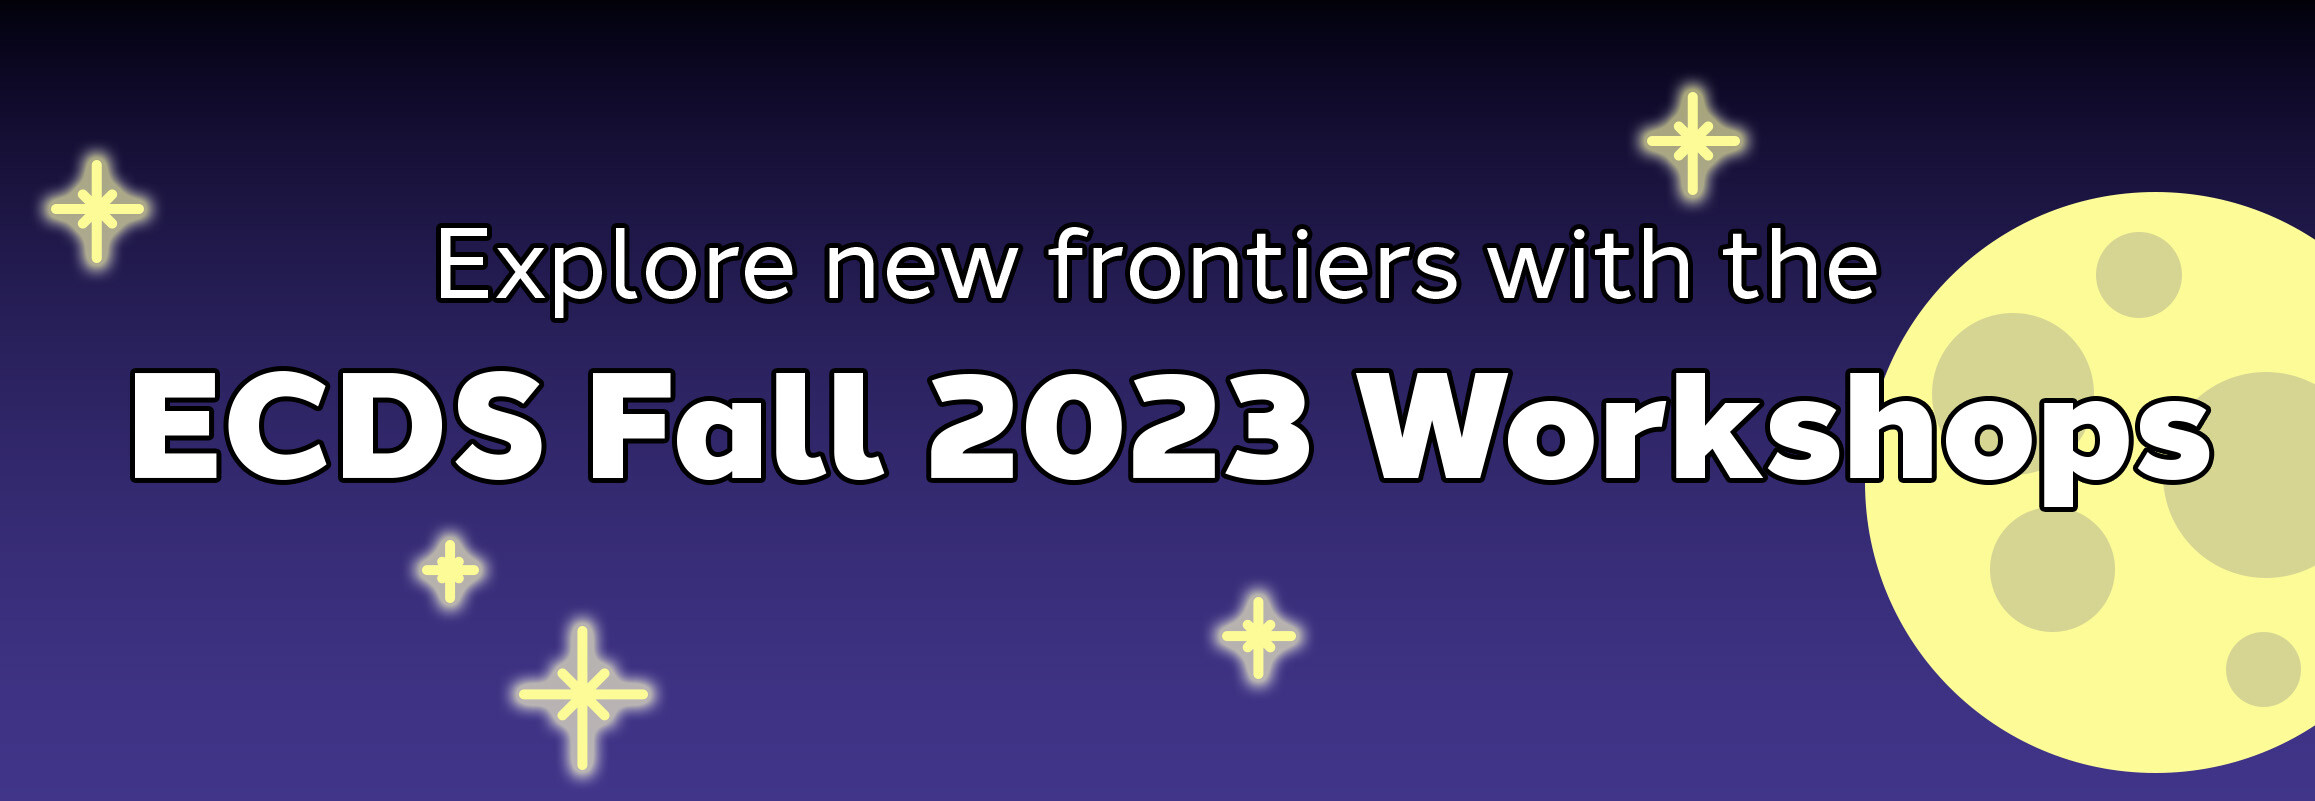 A banner with a moon and stars on it that says "Explore new frontiers with the Fall 2023 Workshops."